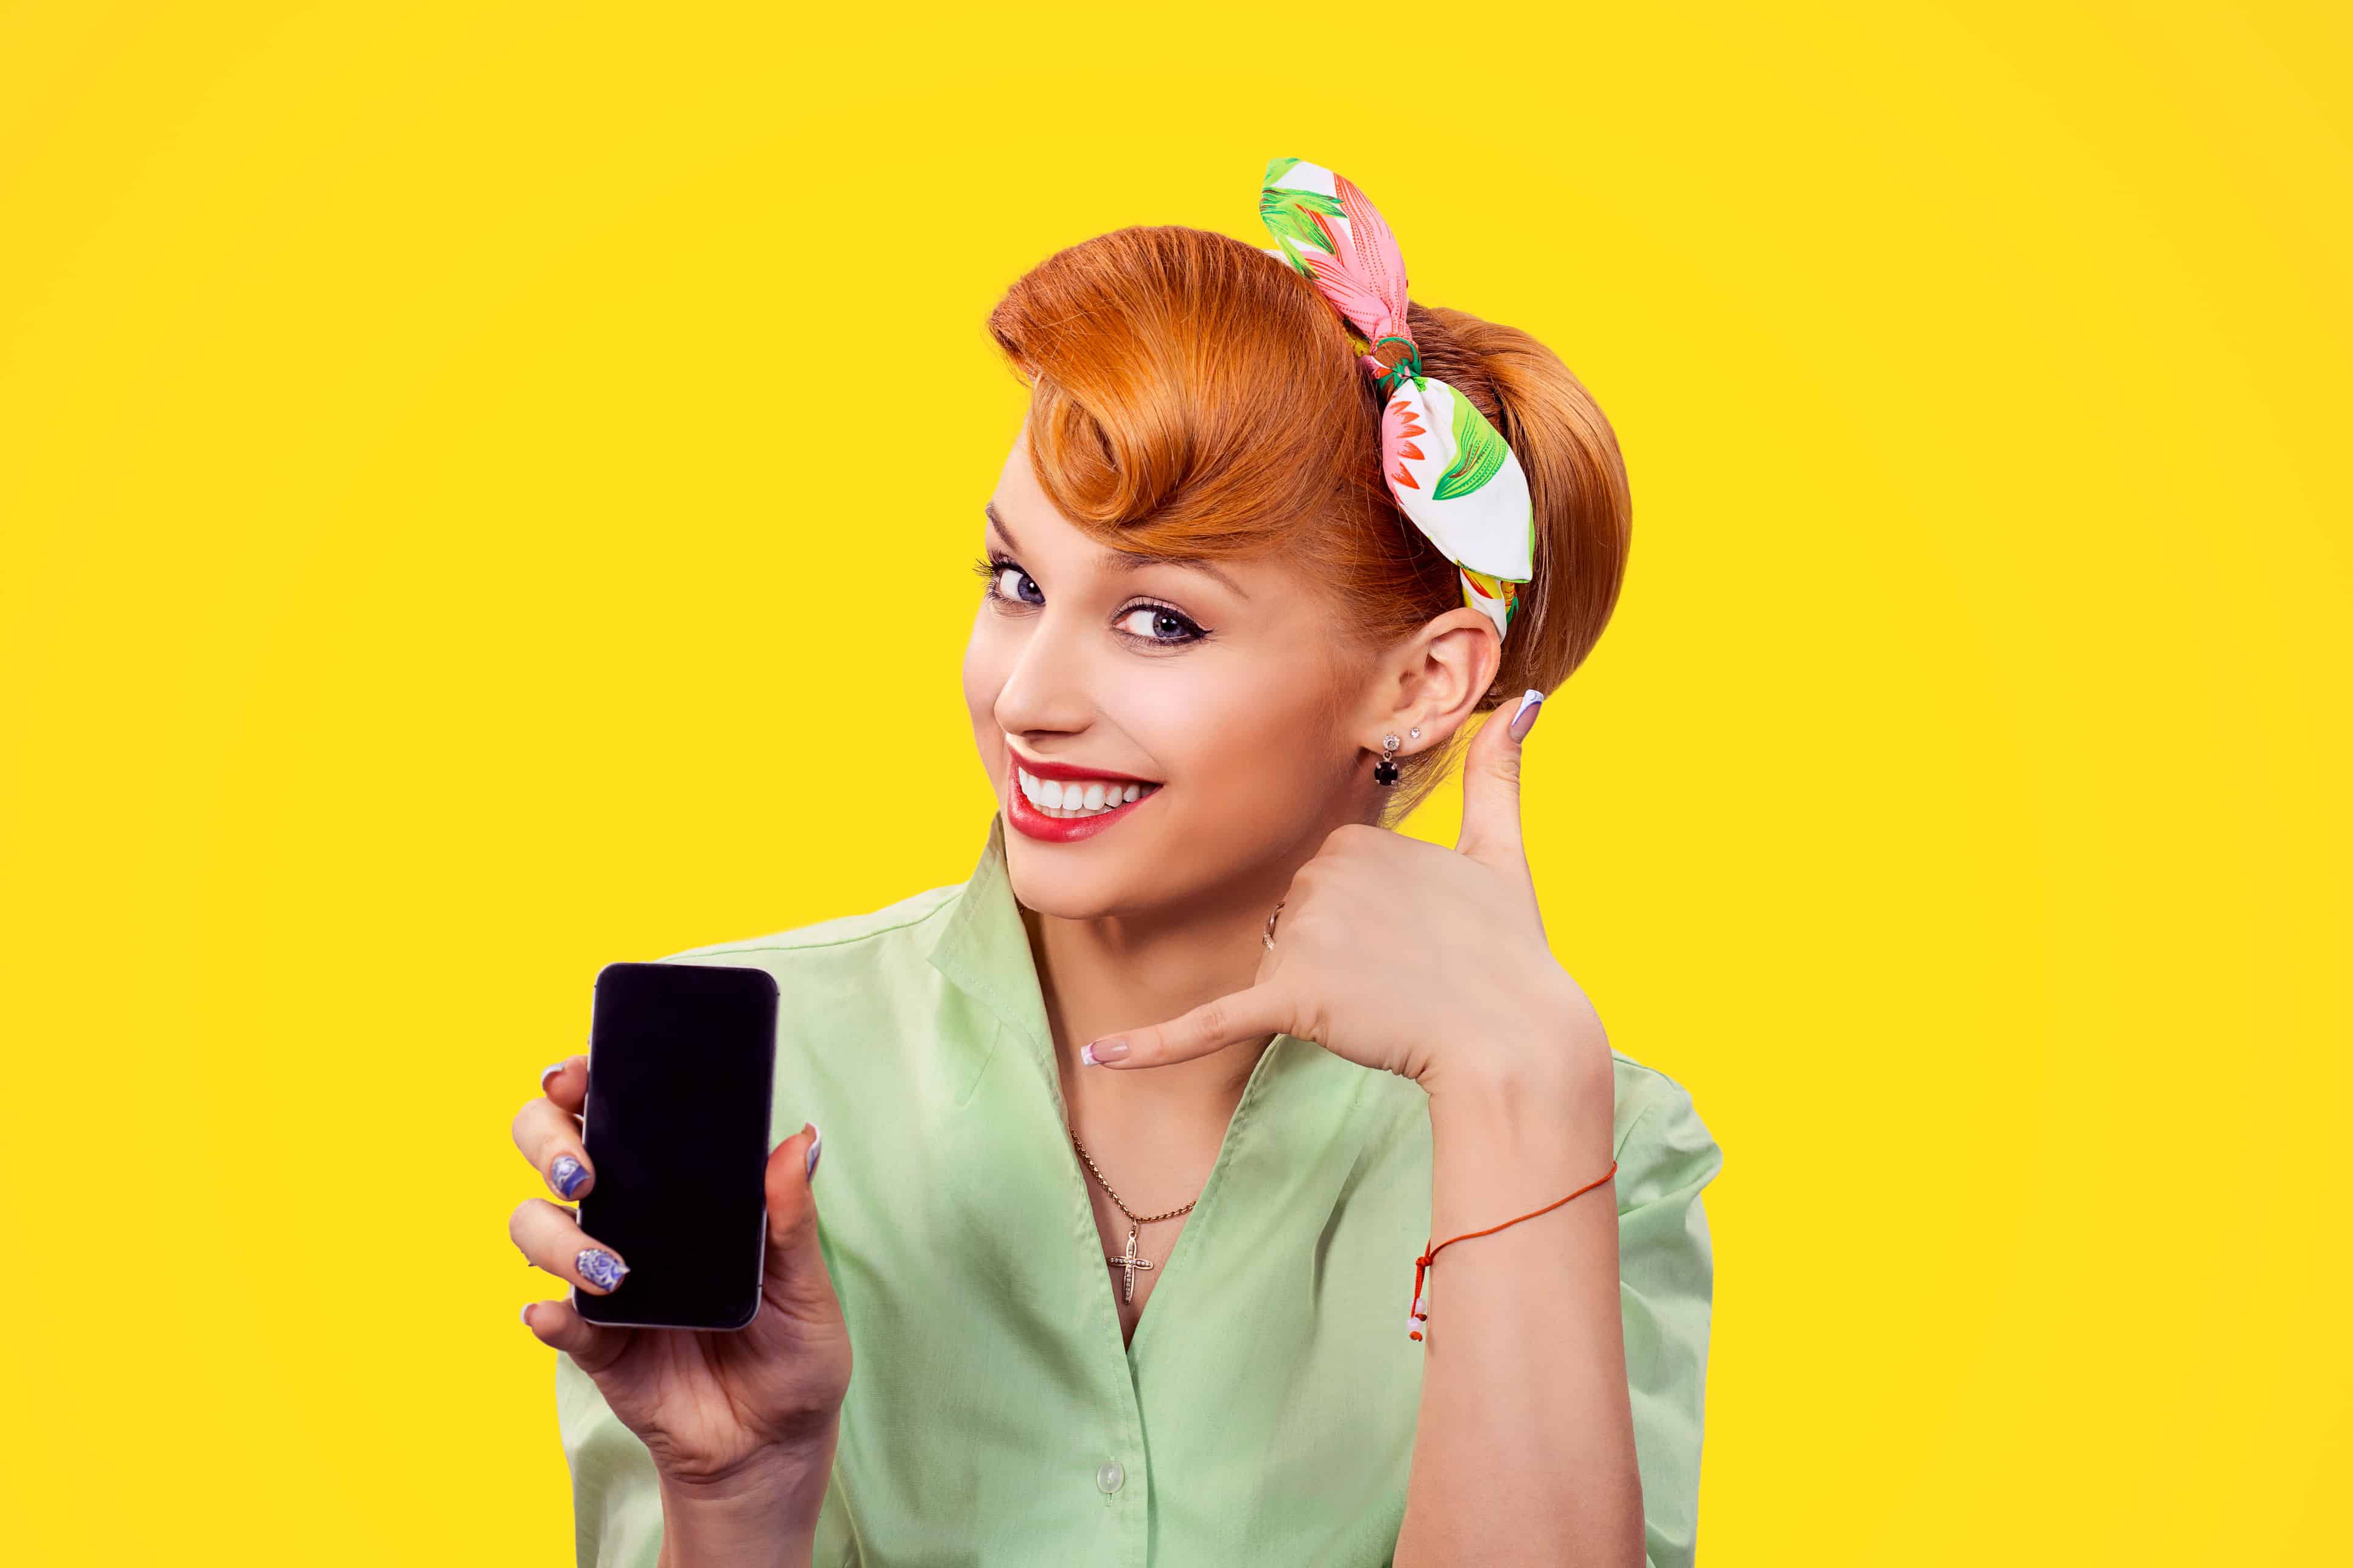 Woman with red hair and green shirt holding a phone in a yellow background